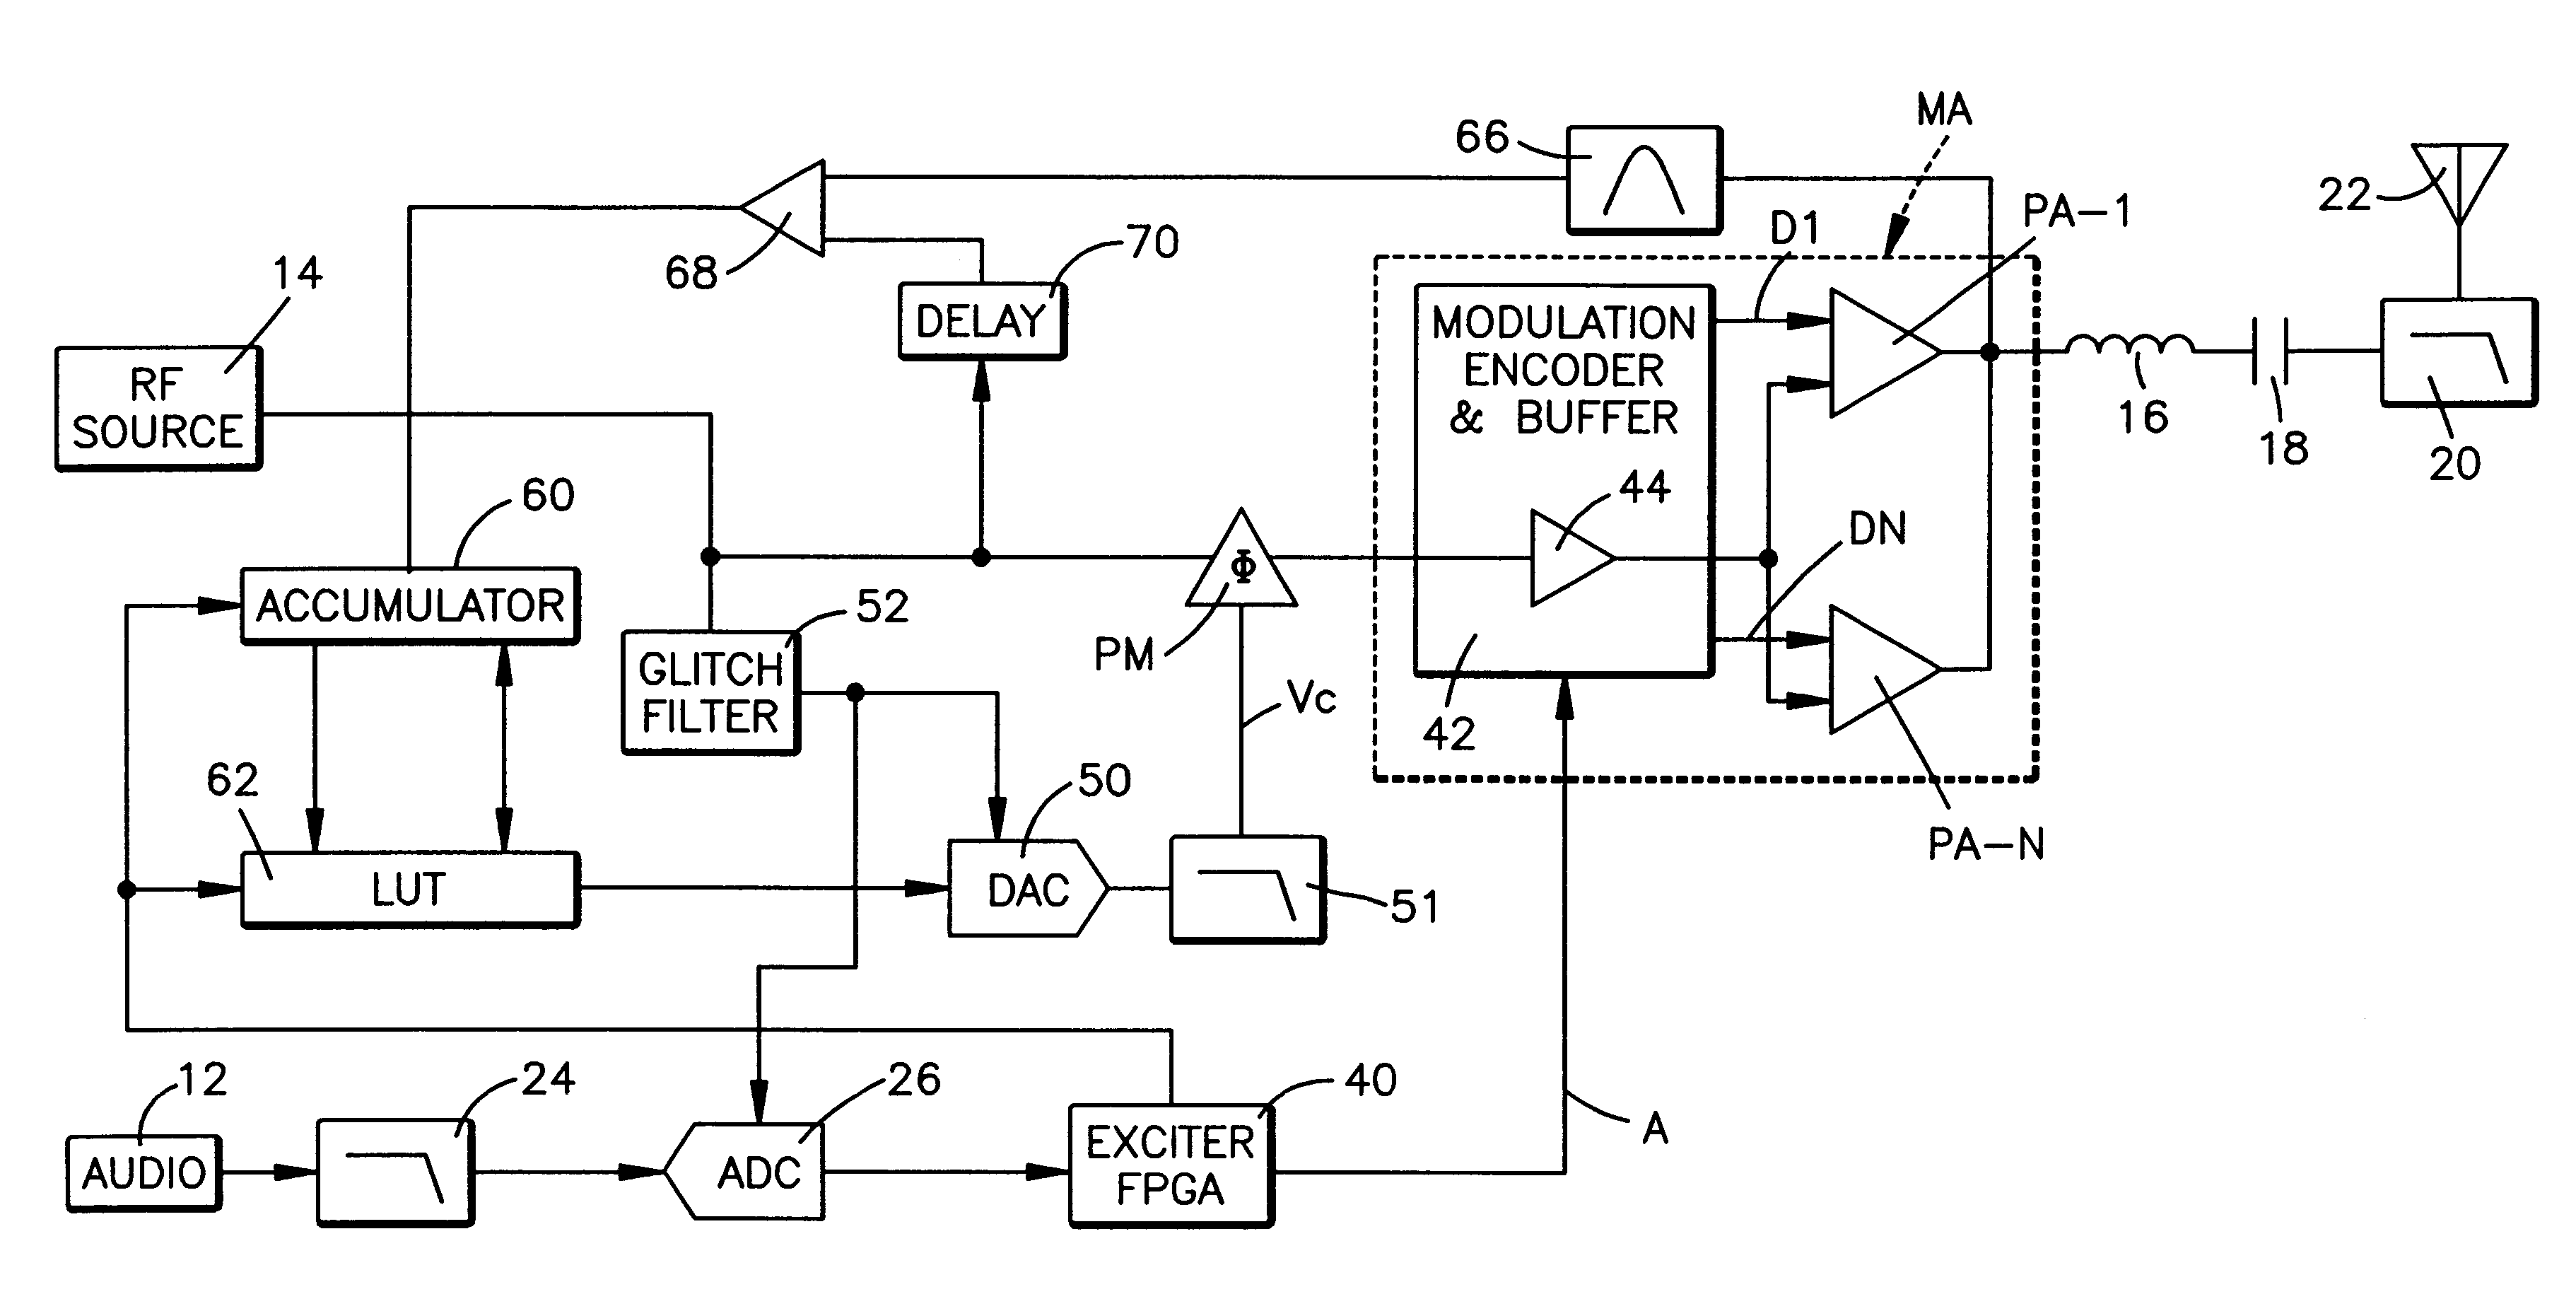 Adaptive compensation for carrier signal phase distortion